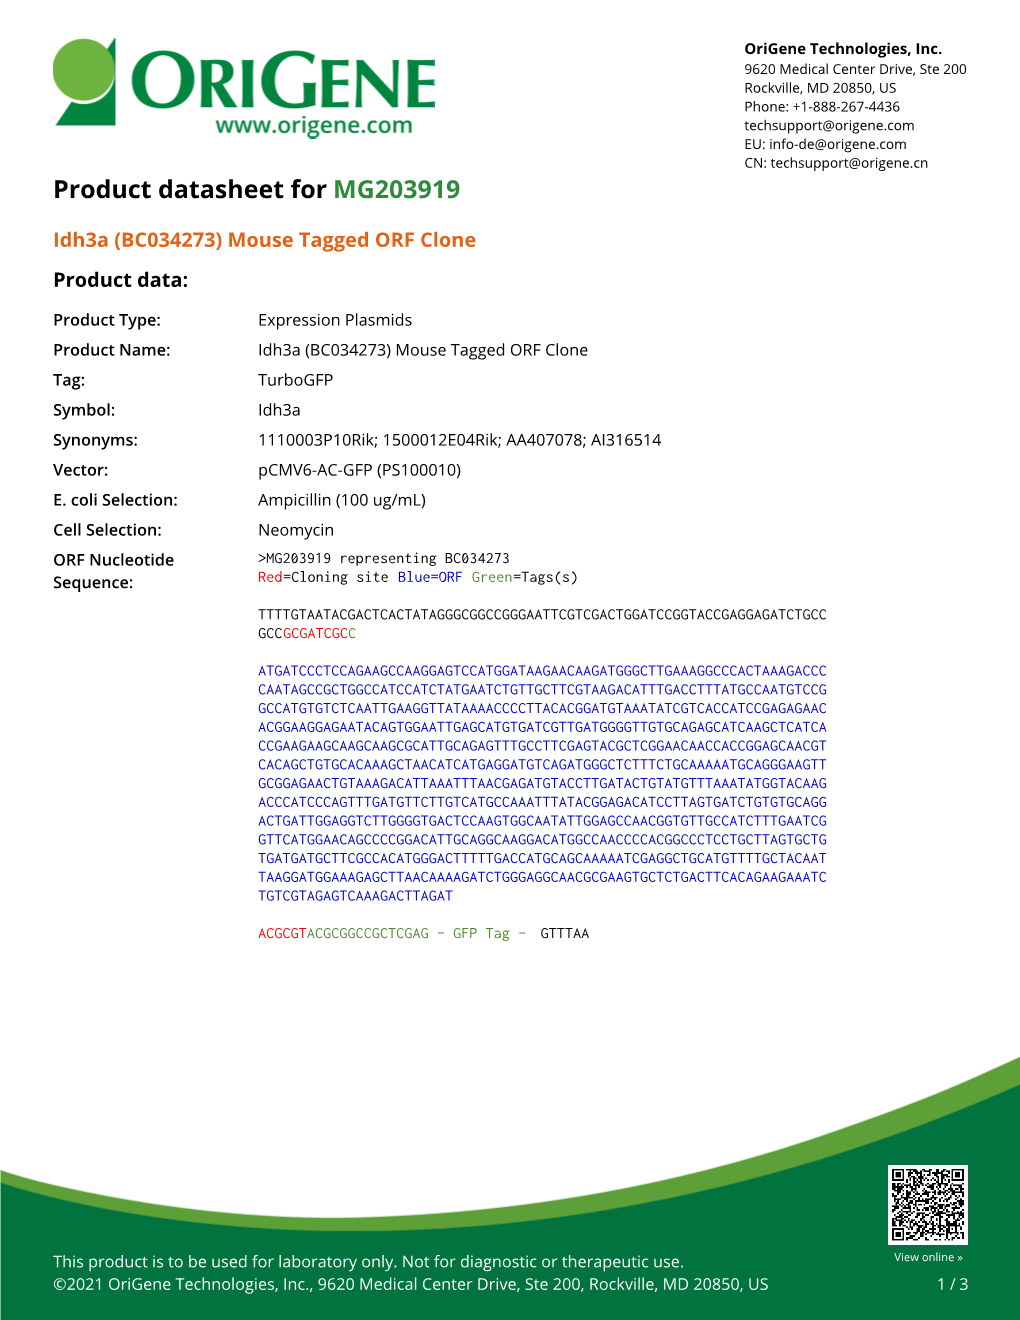 Idh3a (BC034273) Mouse Tagged ORF Clone – MG203919 | Origene